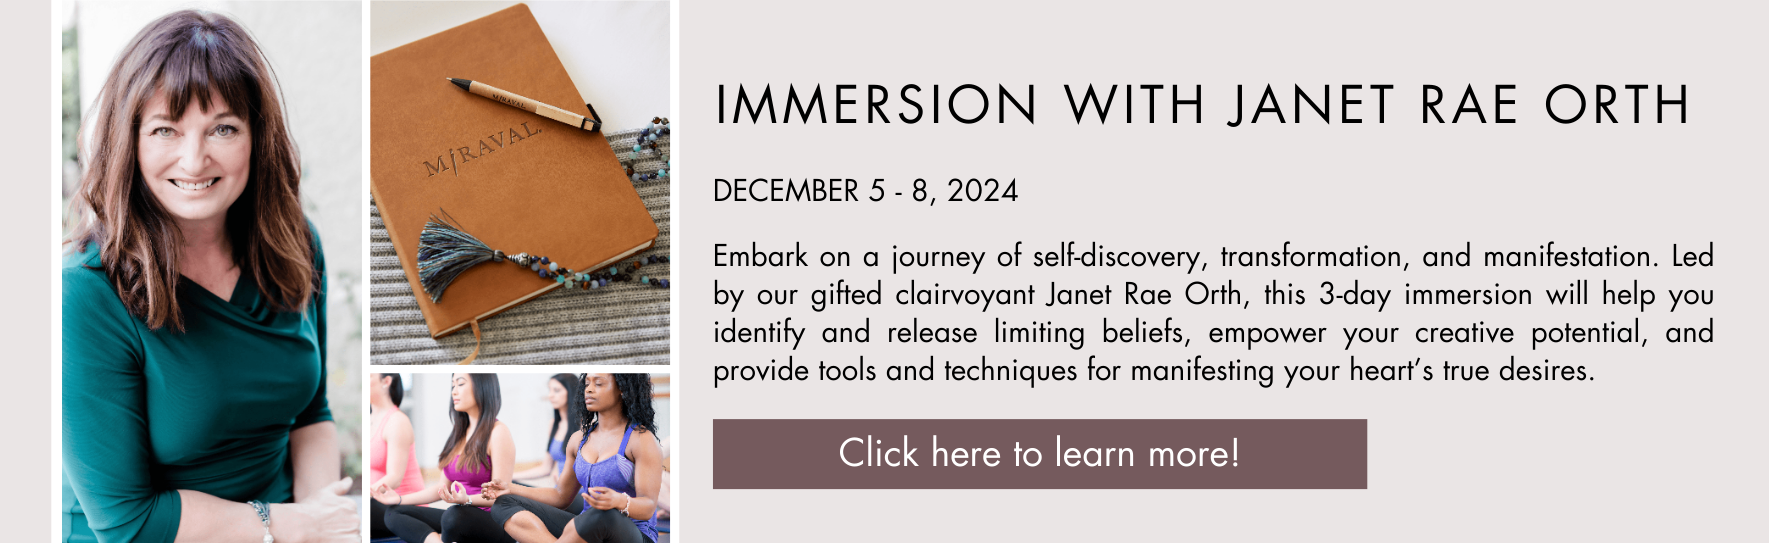 IMMERSION WITH JANET RAE ORTH